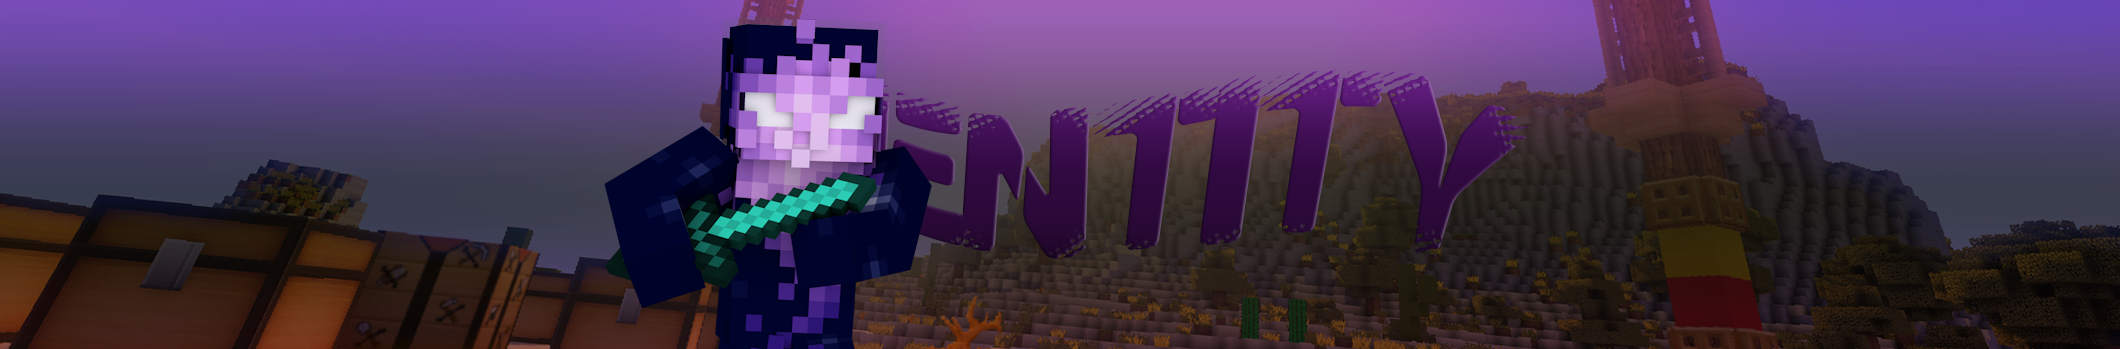 Entity Banner.png